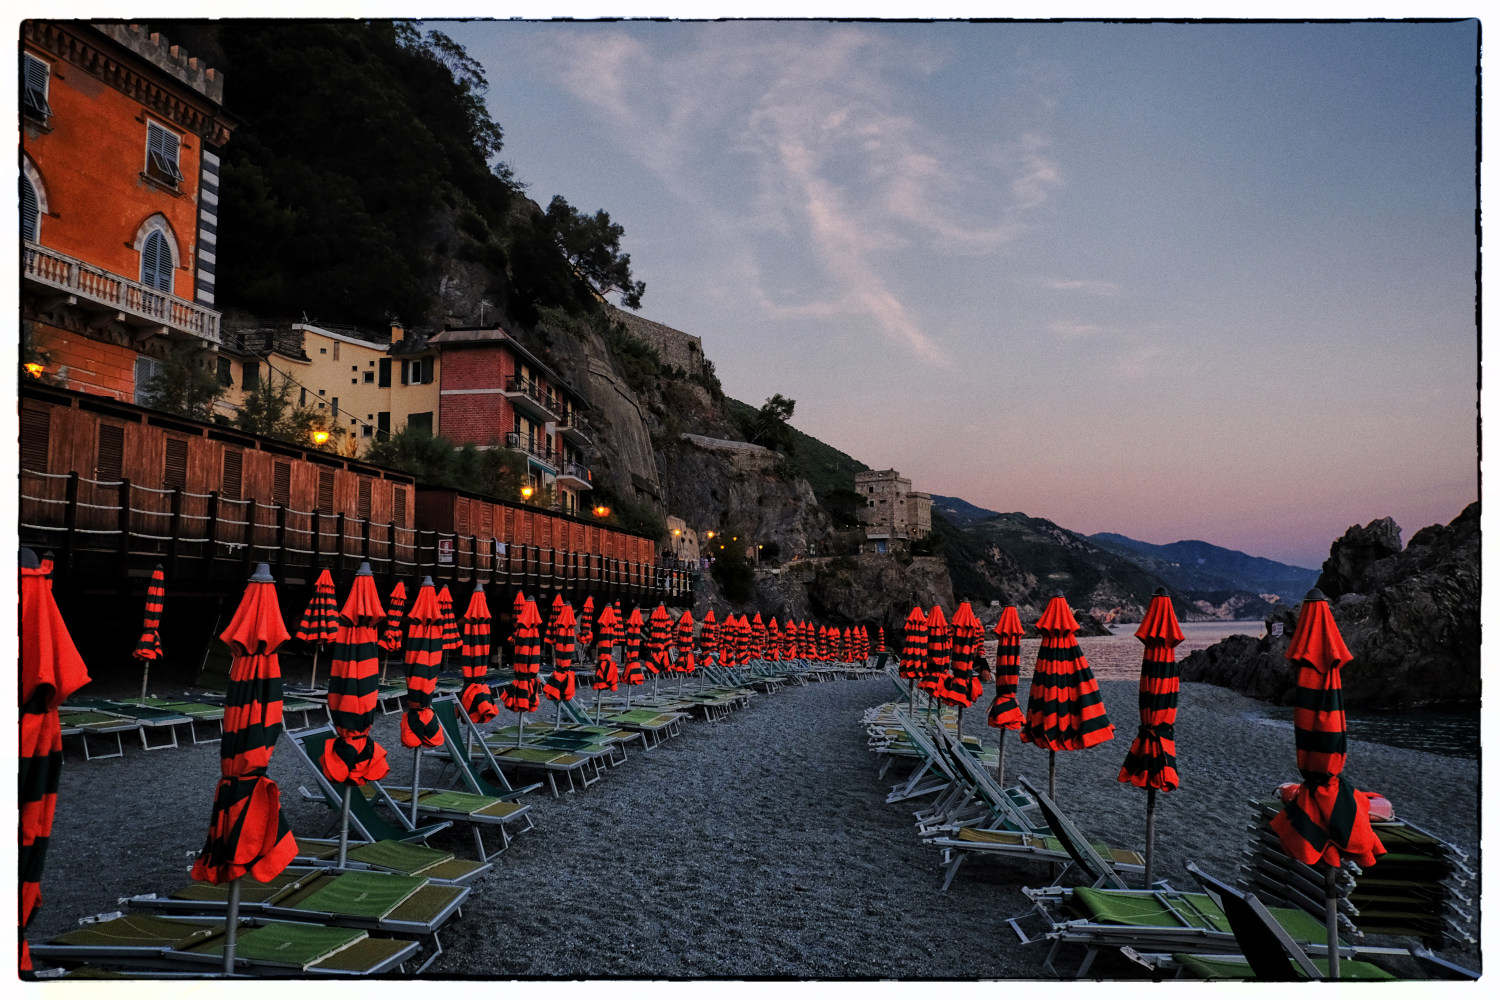 Folded orange umbrellas and green deckchairs line the beach in the evening at Monterosso al Mare, Italy. Food and travel photography by Kent Johnson